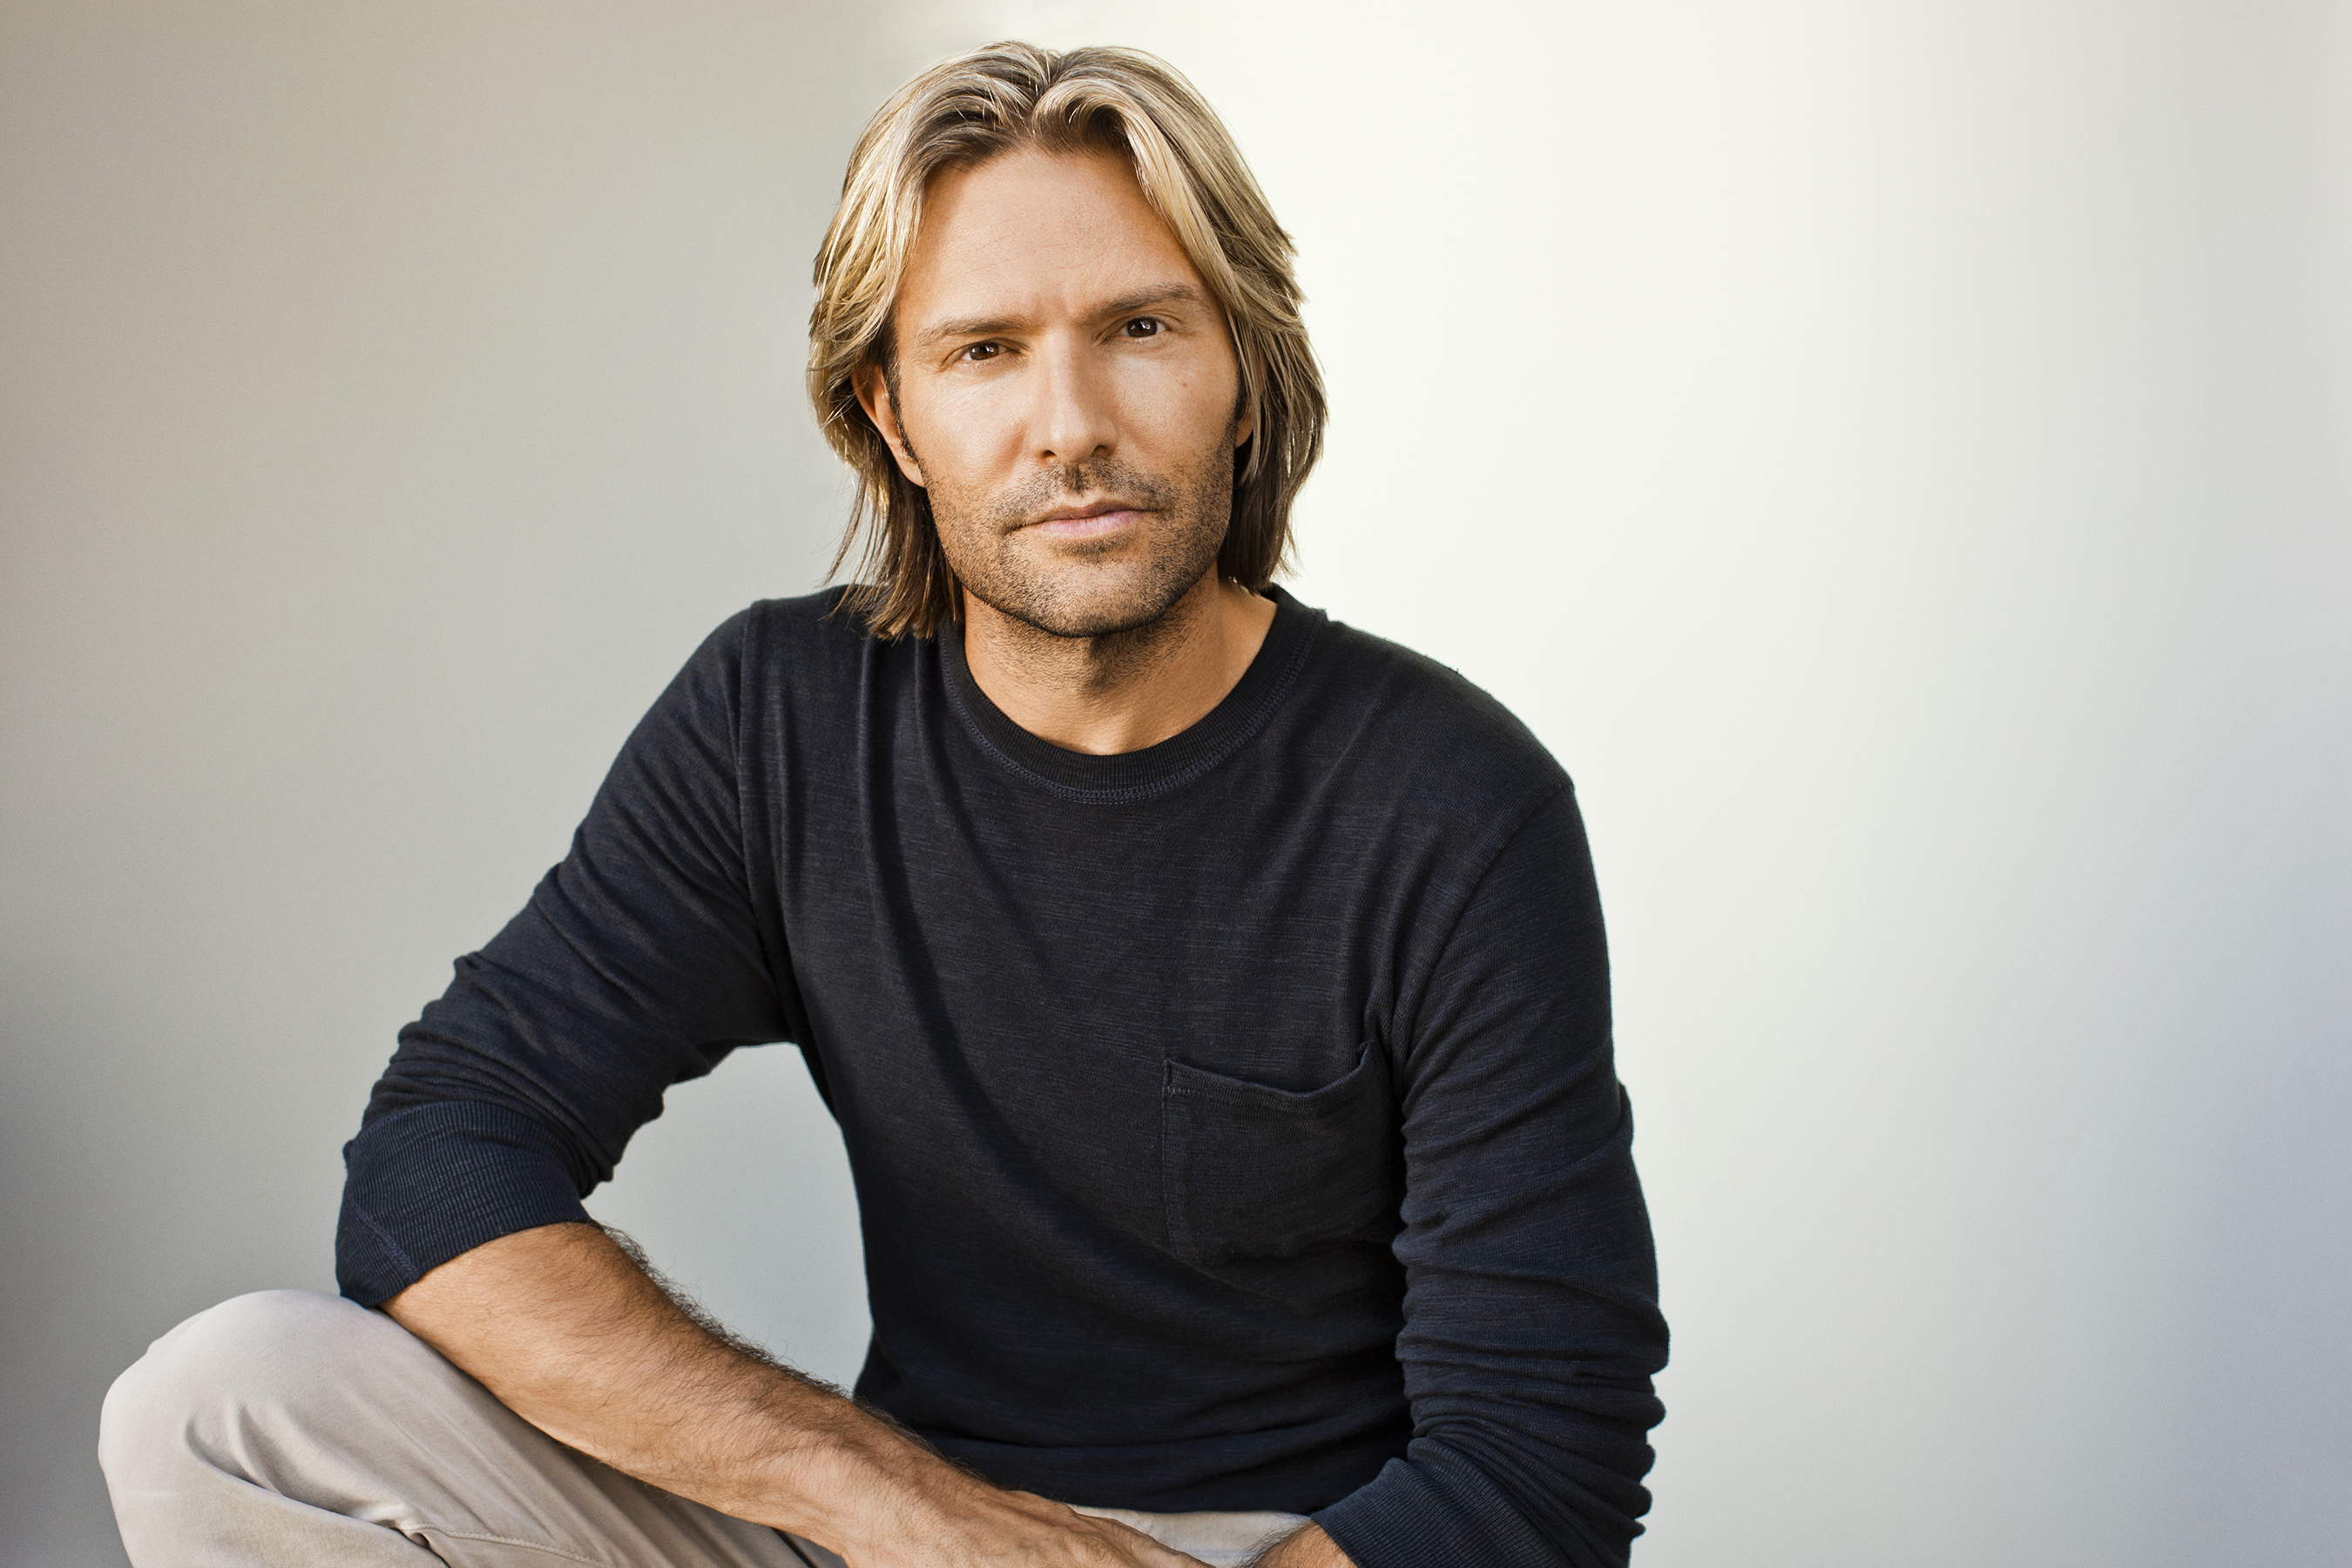 Eric Whitacre on X: Now I ain't sayin' she a gold digger, but she ain't  messin' with no Baroque  / X